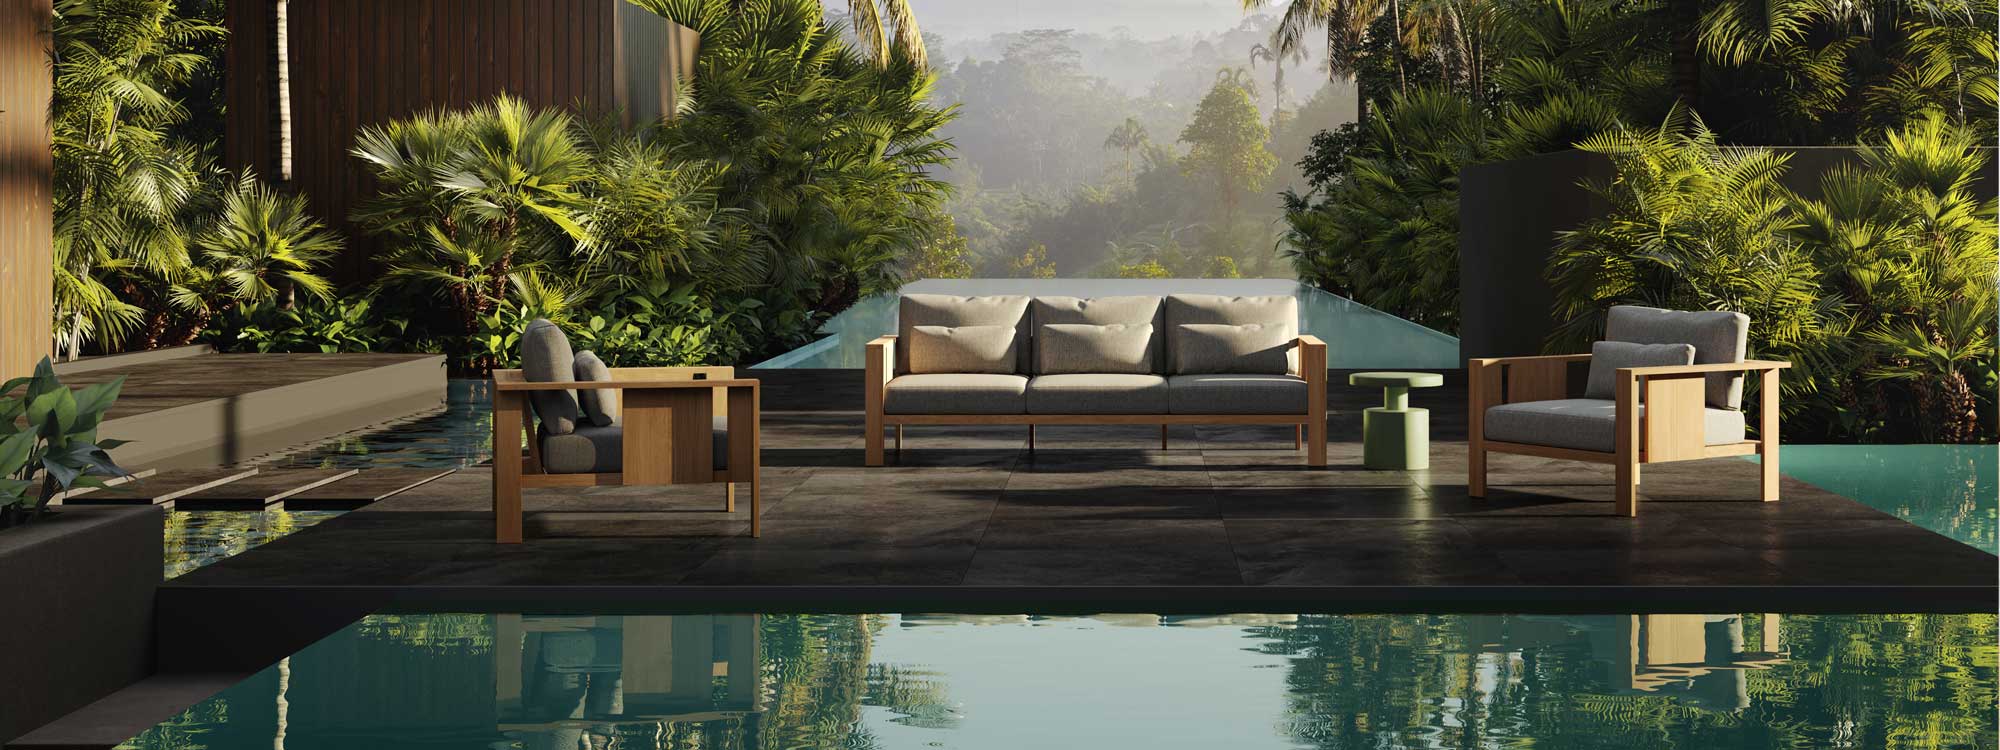 Image of Beam linear garden sofa and lounge chairs in FSC iroko hardwood by Oiside furniture for the future, Spain